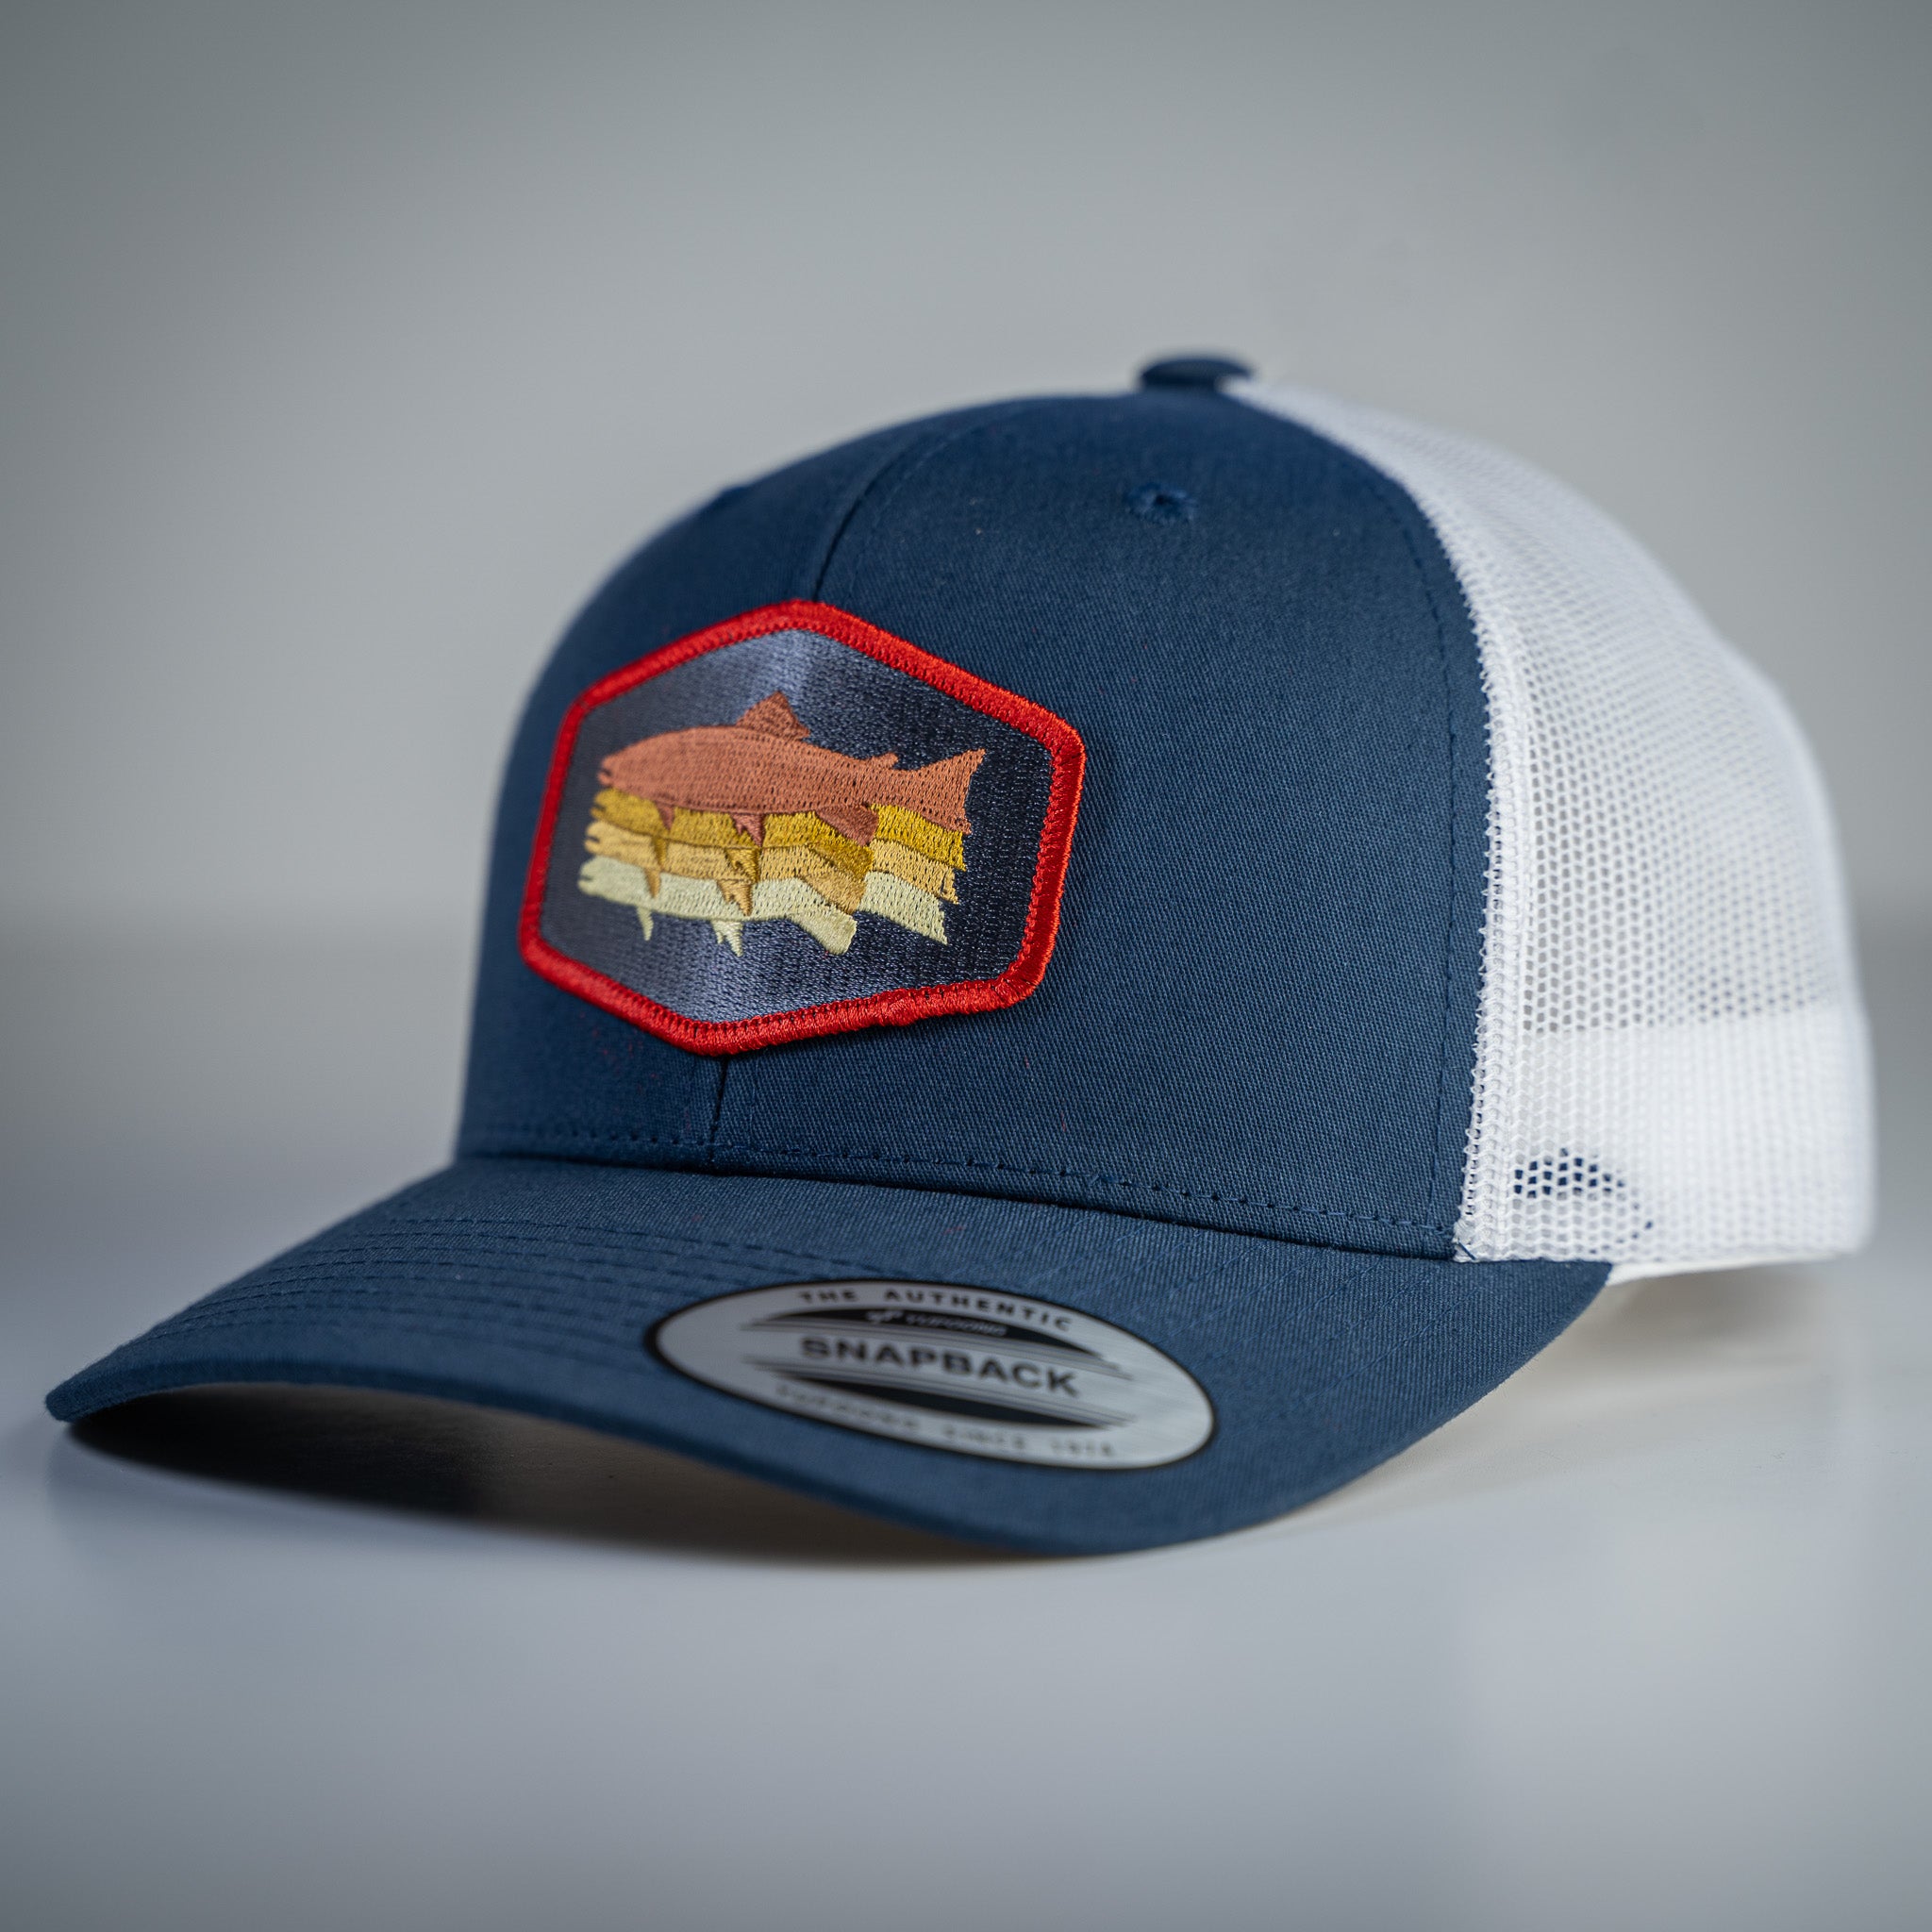 Trout Stack' Trucker - Khaki & 'Bow | Fishing Caps & Hats | Anglers Only Blue & Brownie